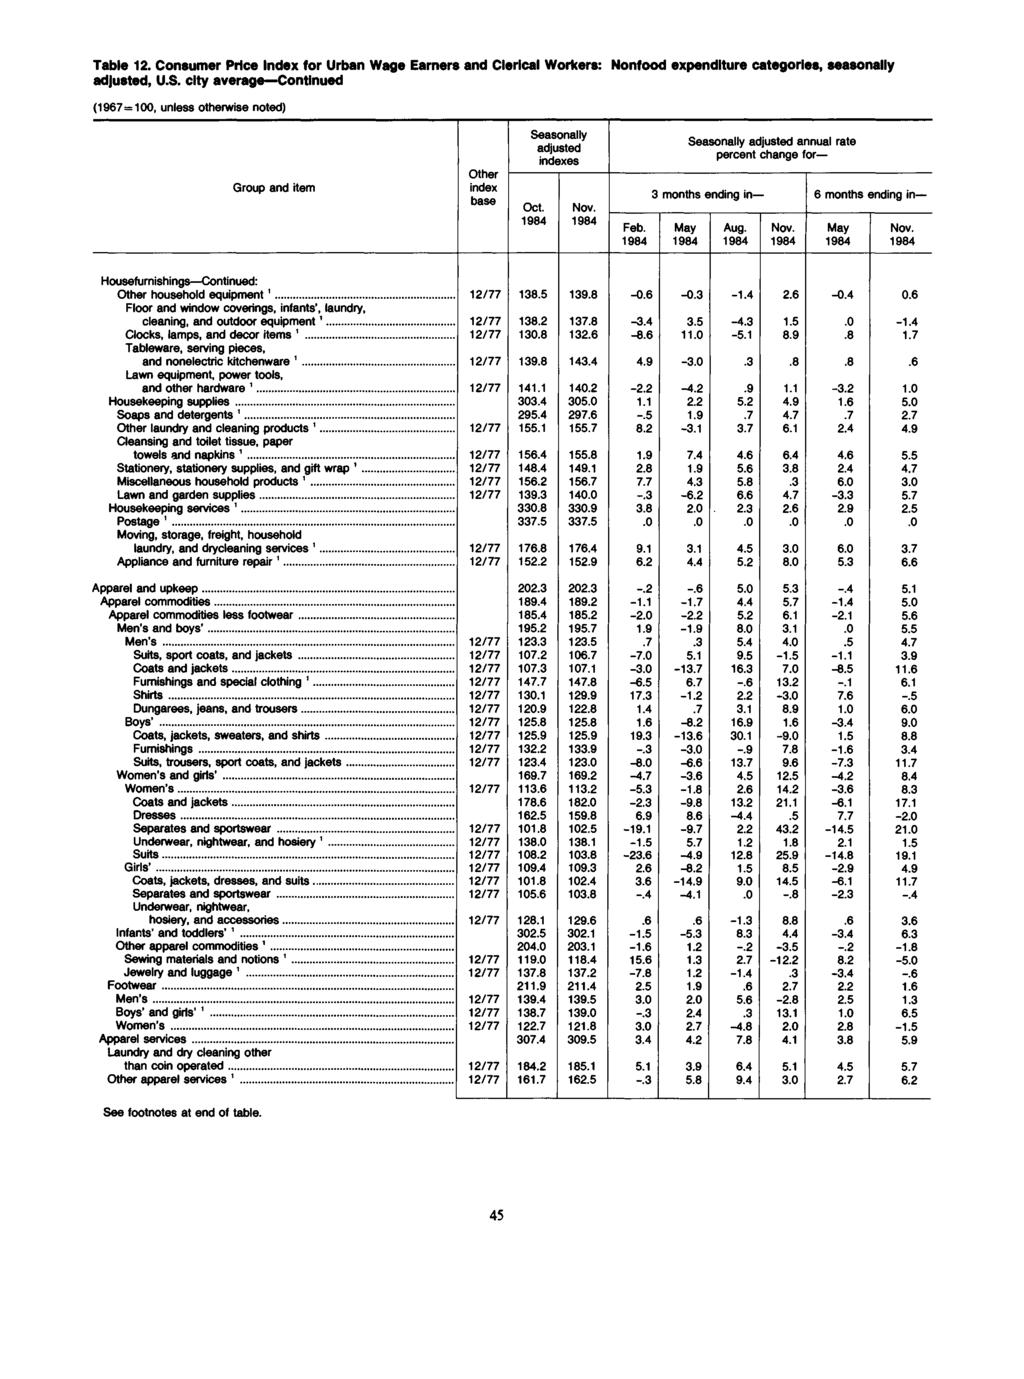 Table 12. Consumer Price for Urban Wage Earners and Clerical Workers: Nonfood expenditure categories, seasonally adjusted, U.S.